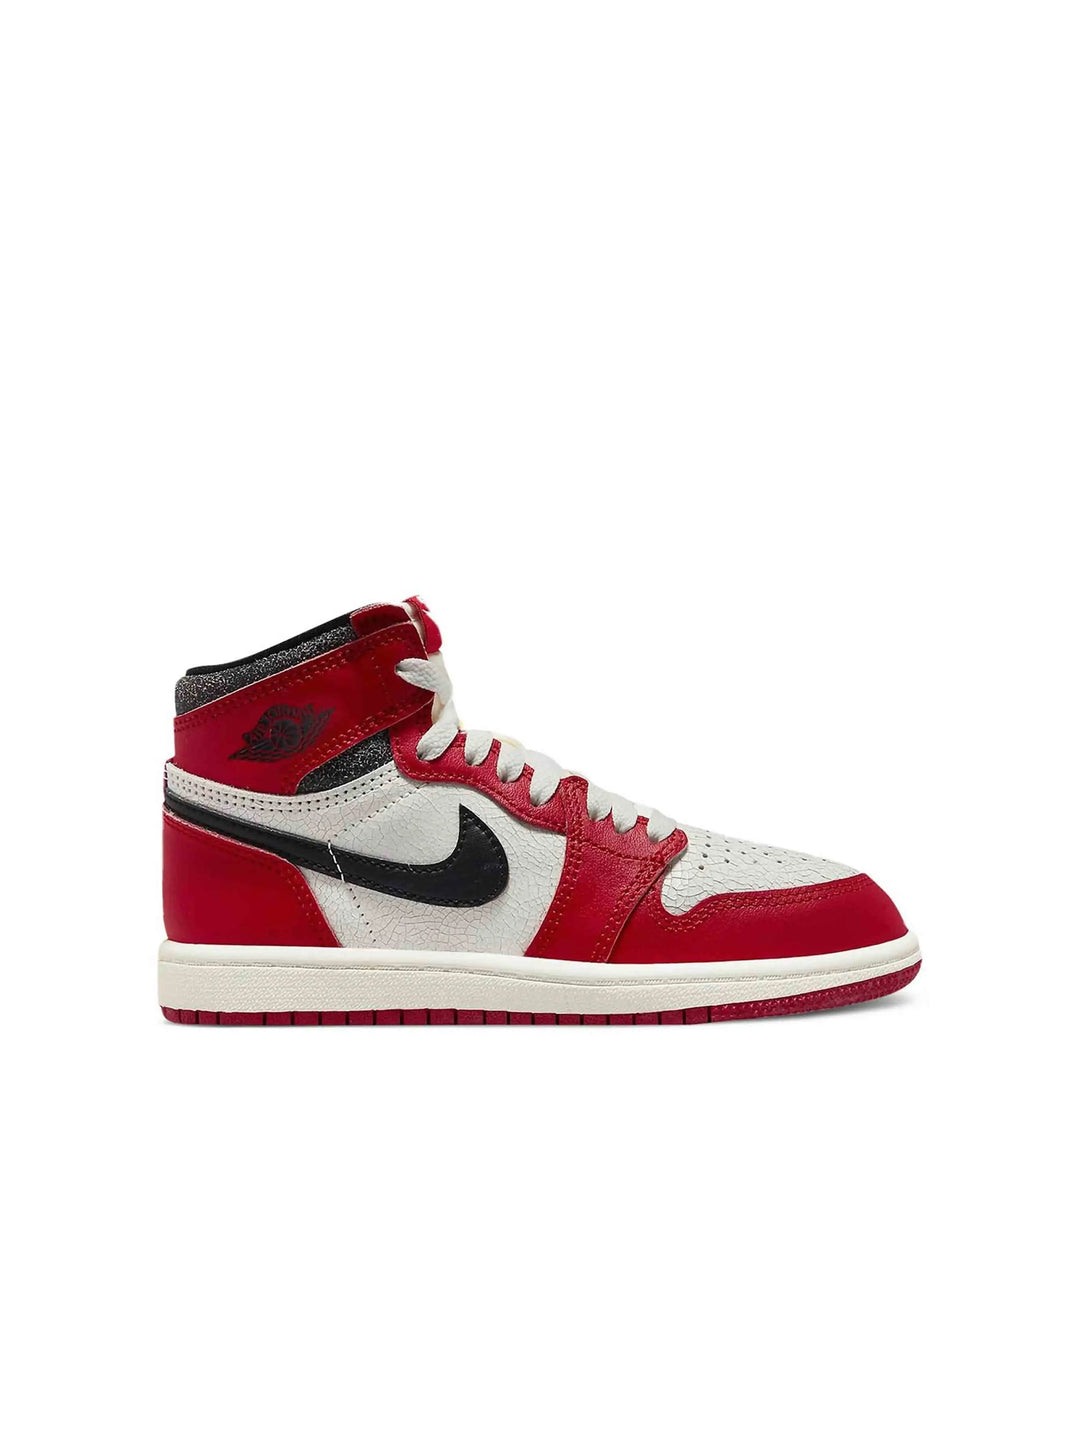 Nike Air Jordan 1 Retro High OG Chicago Lost and Found (PS) Prior